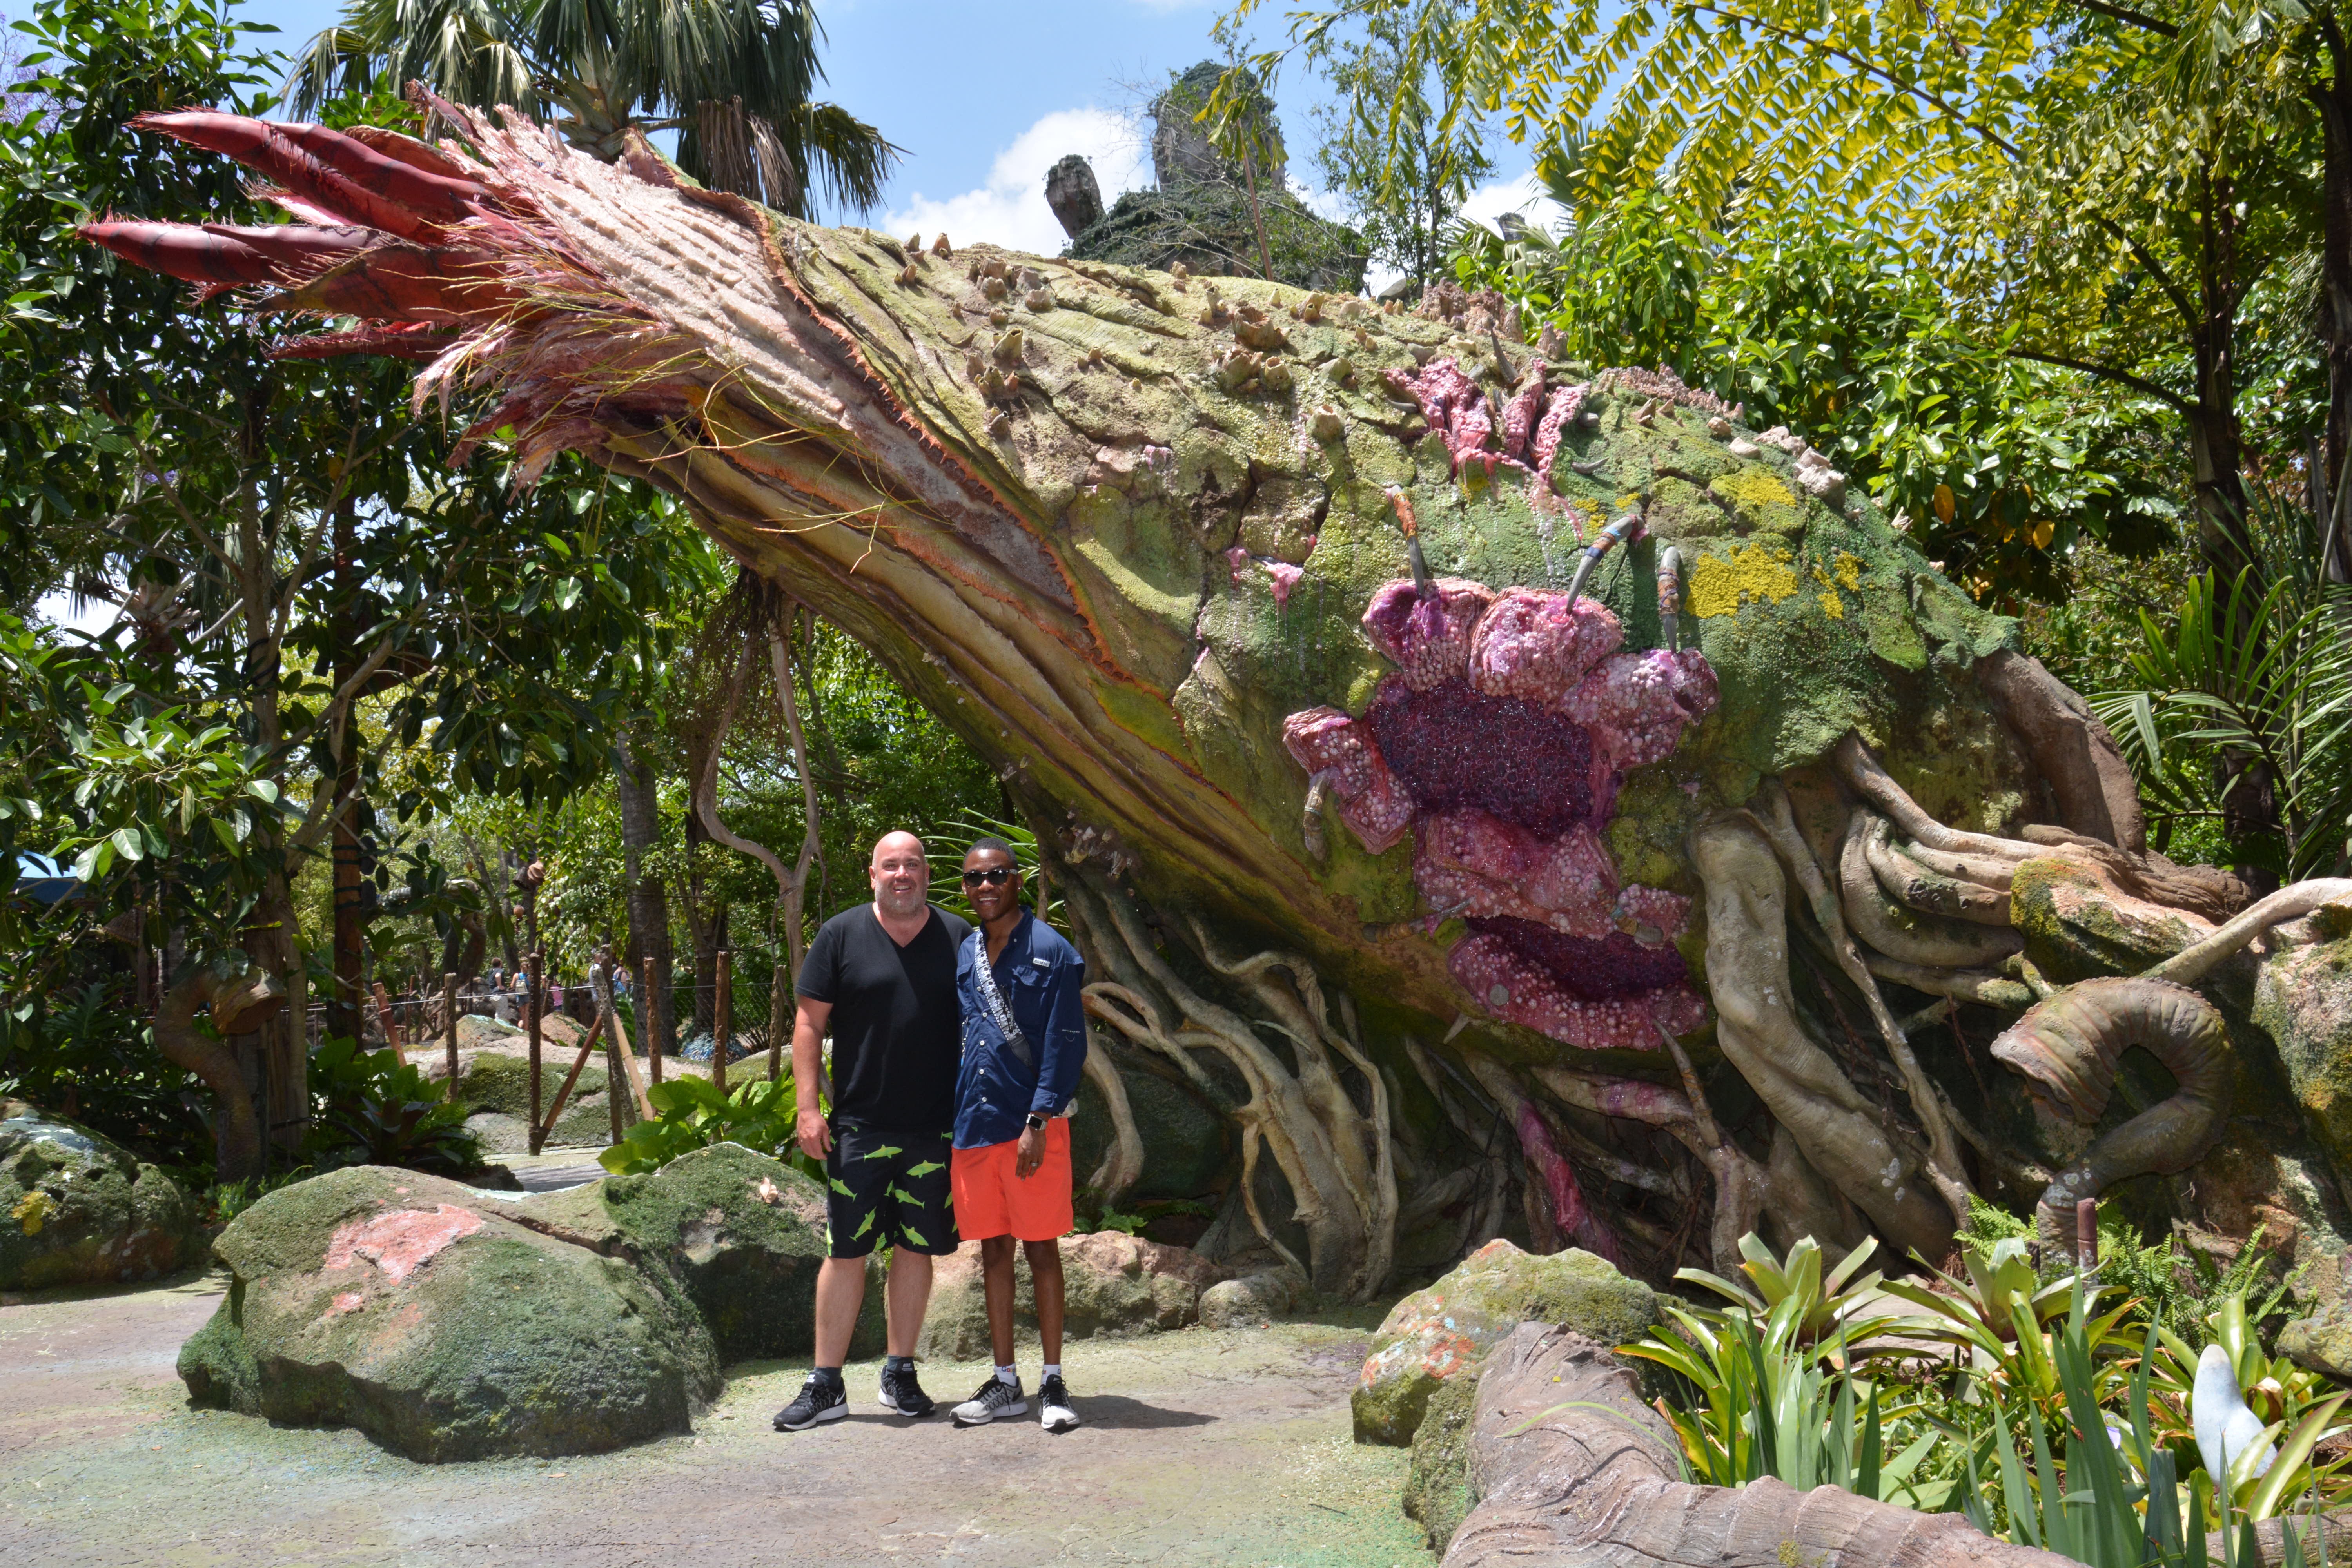 is avatar at disney animal kingdom open for extra magic hours on june 13 2019open.for.extra.n